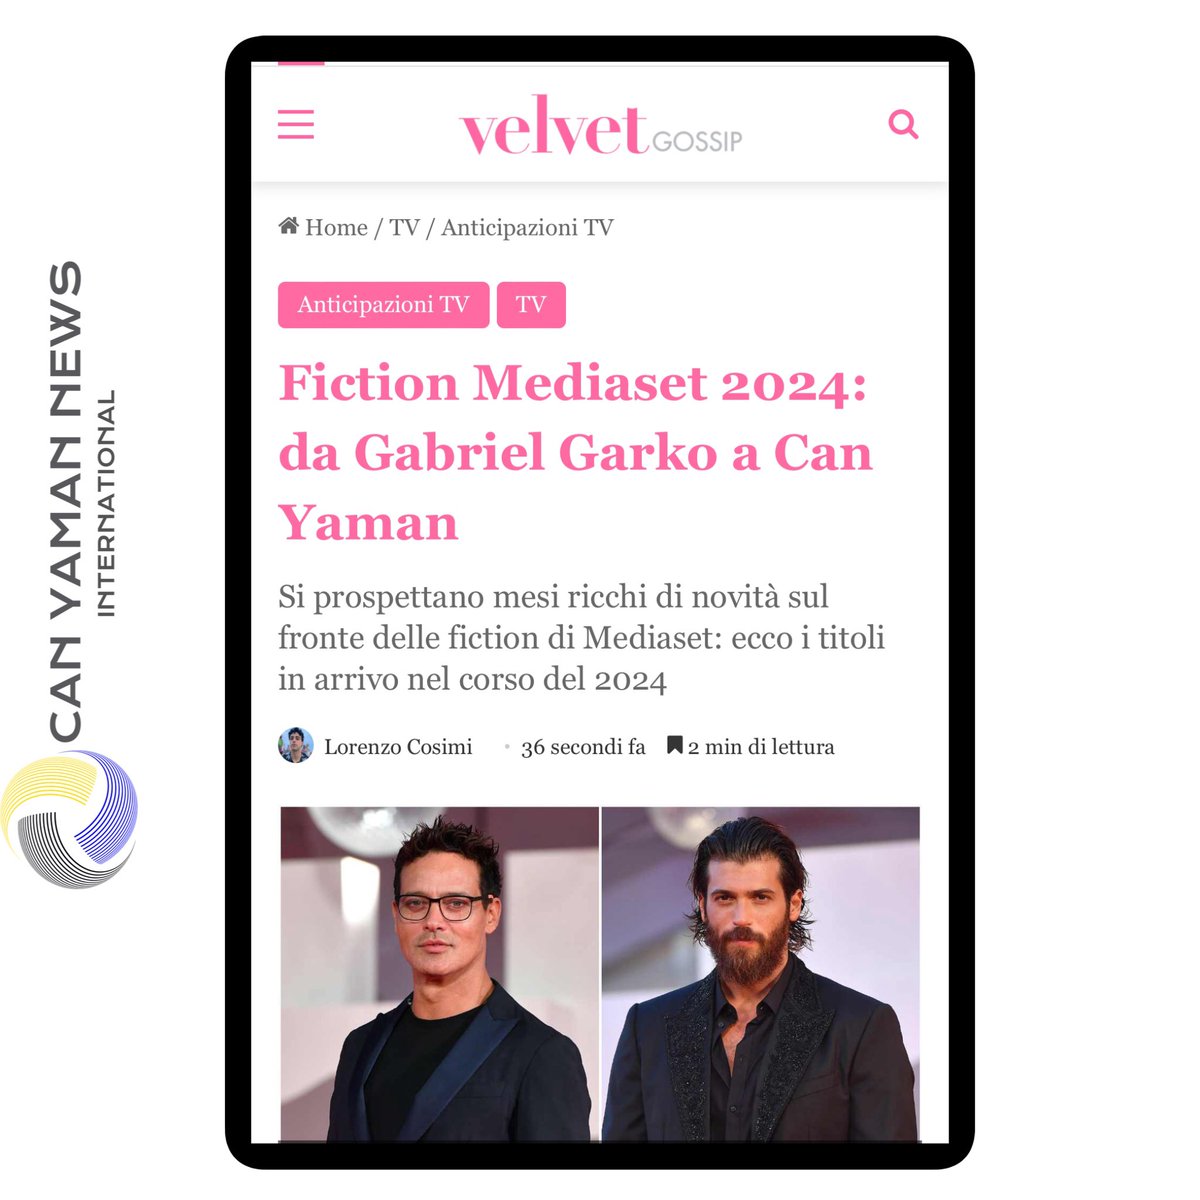 🇮🇹 (Italy) 🗞️| Fiction Mediaset 2024: from Gabriel Garko to #CanYaman
Months full of news await on the Mediaset fiction front: here are the titles arriving during 2024 - #ViolaComeIlMare2 

🇮🇹:Fiction Mediaset 2024: da Gabriel Garko a Can Yaman
Si prospettano mesi ricchi di…